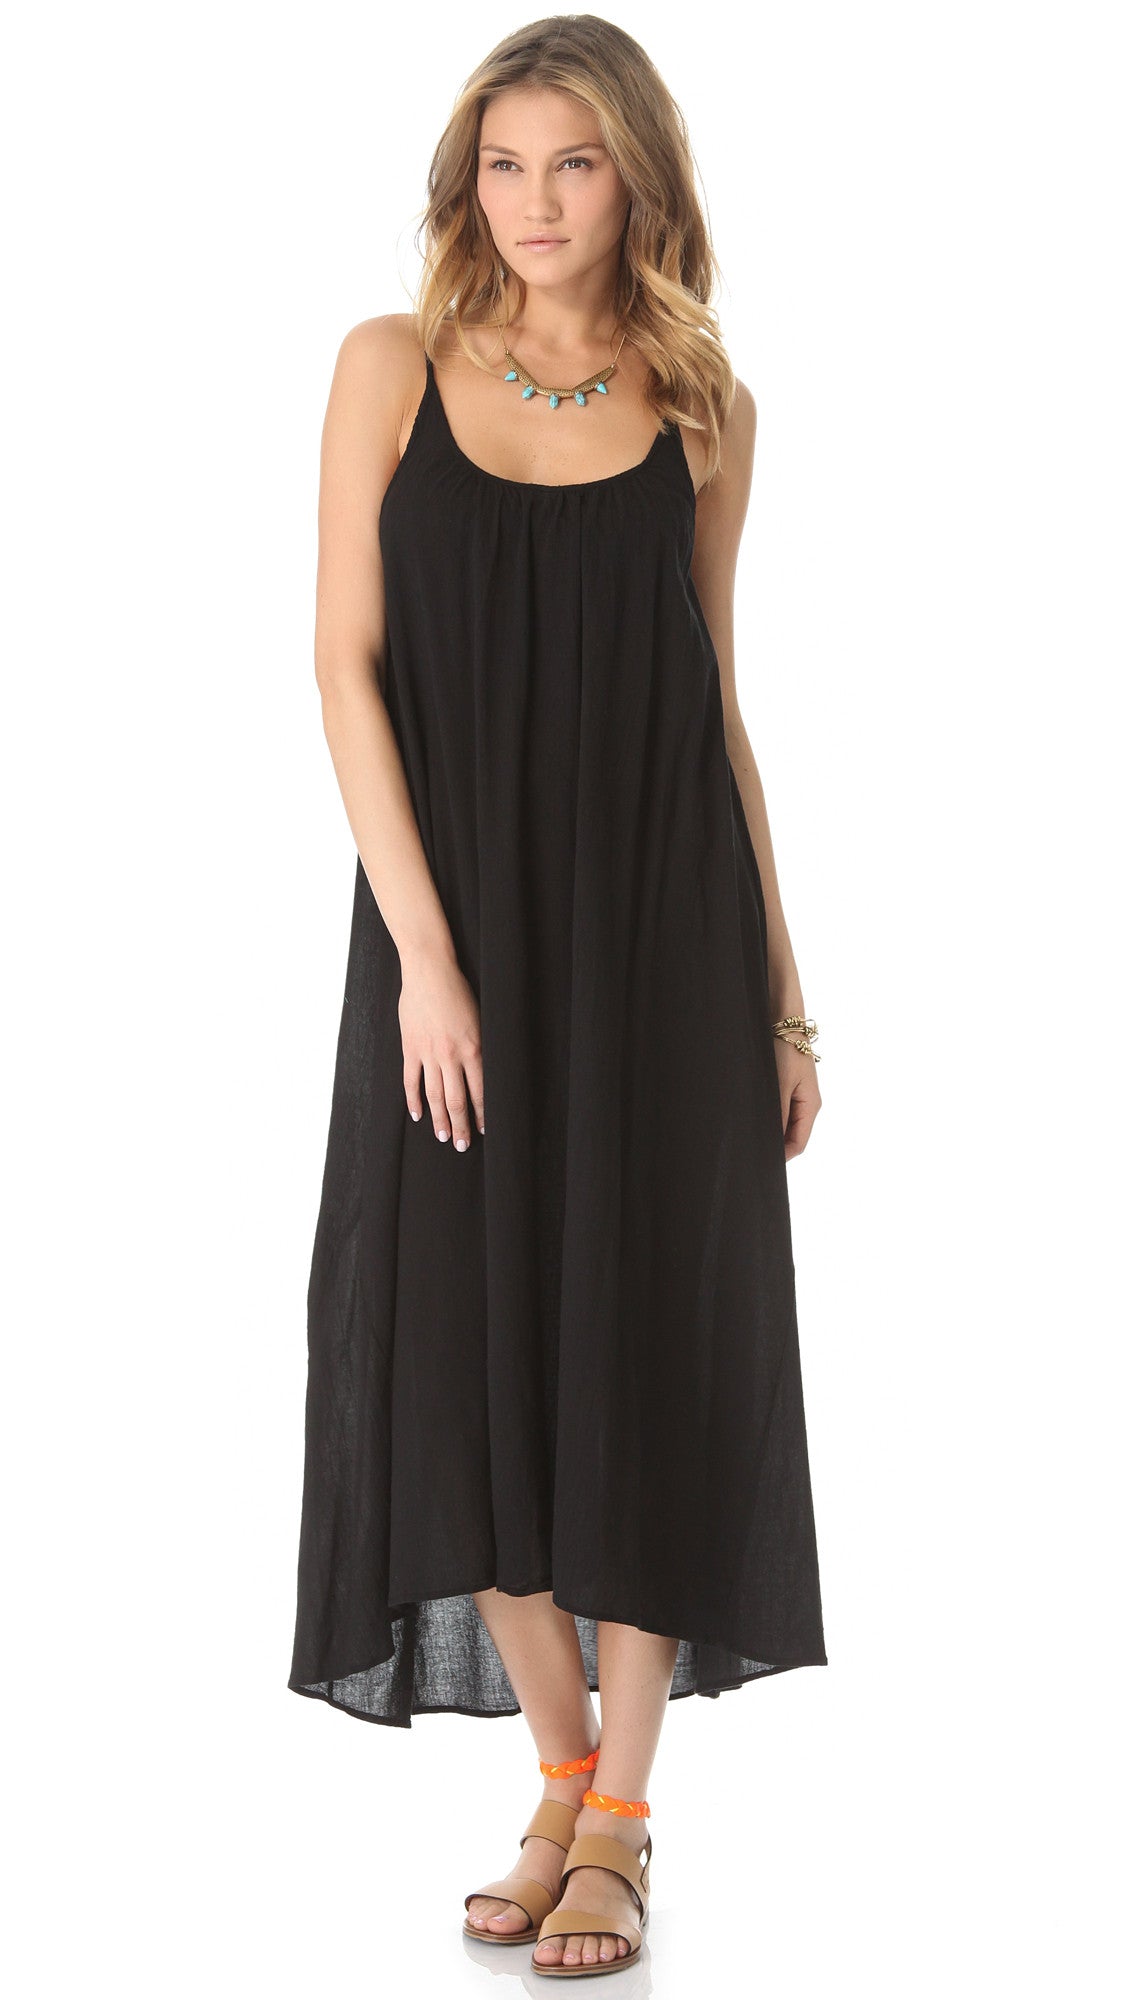 Tulum Dress in Black by 9 Seed Brand - Maxi - Cover-up - Gauze Knit ...